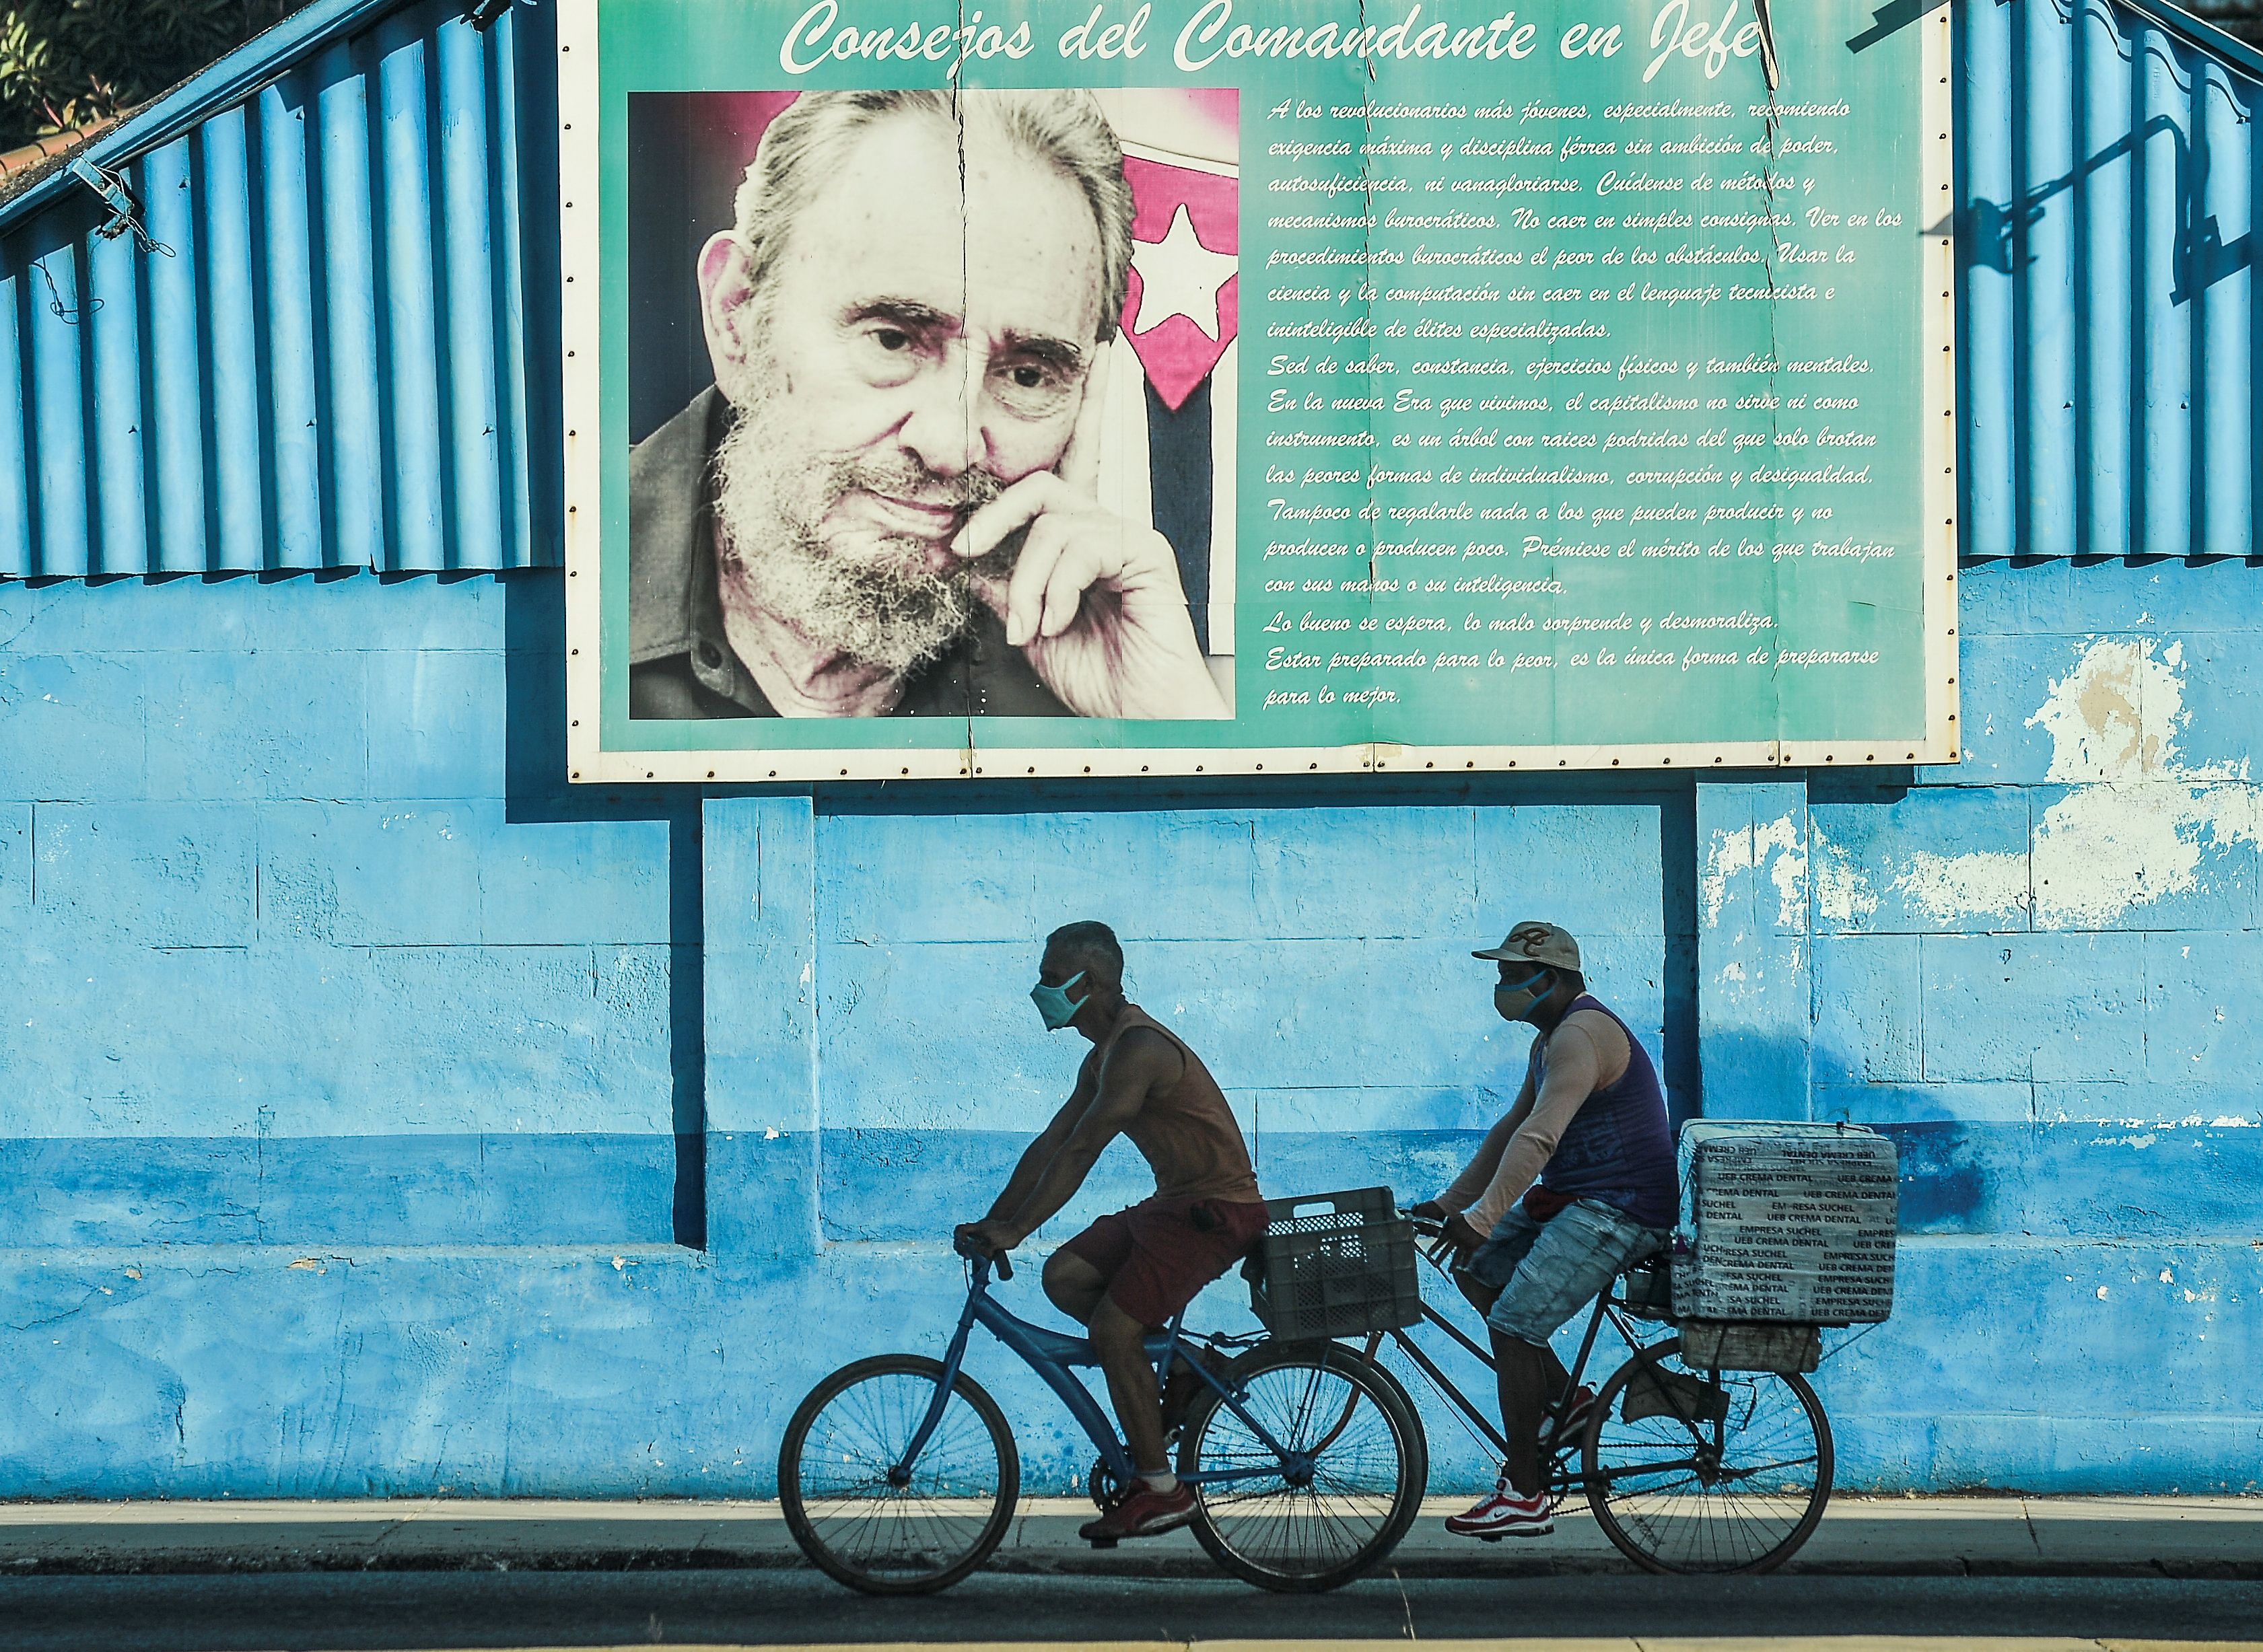 Cuba remained communist even after the collapse of the Soviet Union